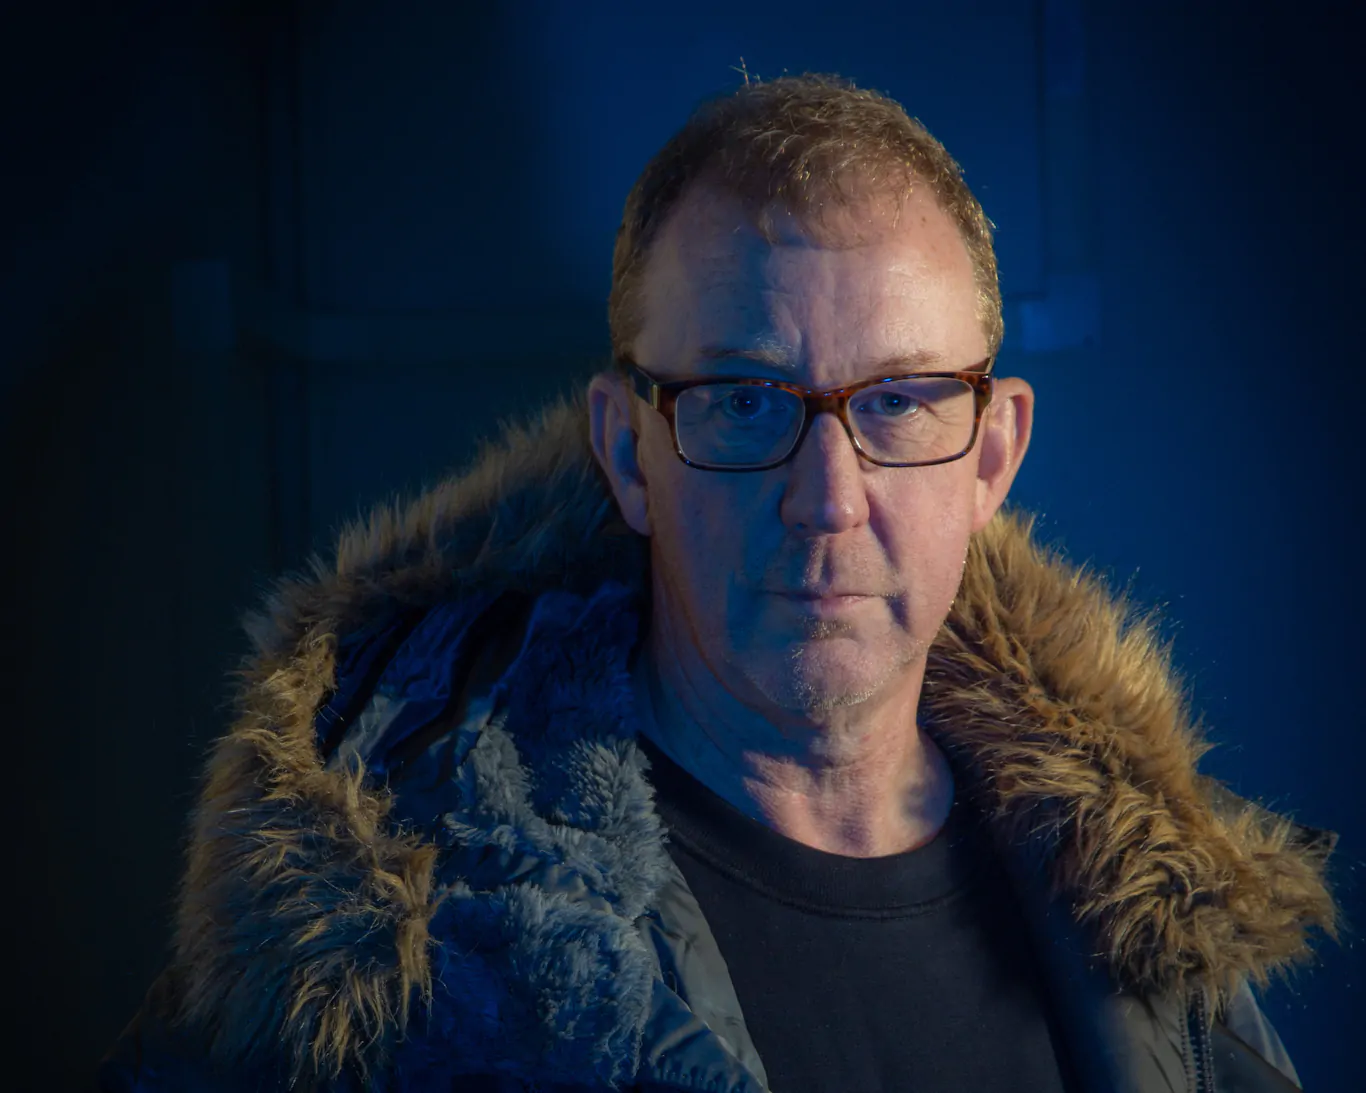 BLUR drummer DAVE ROWNTREE shares new track ‘Tape Measure’